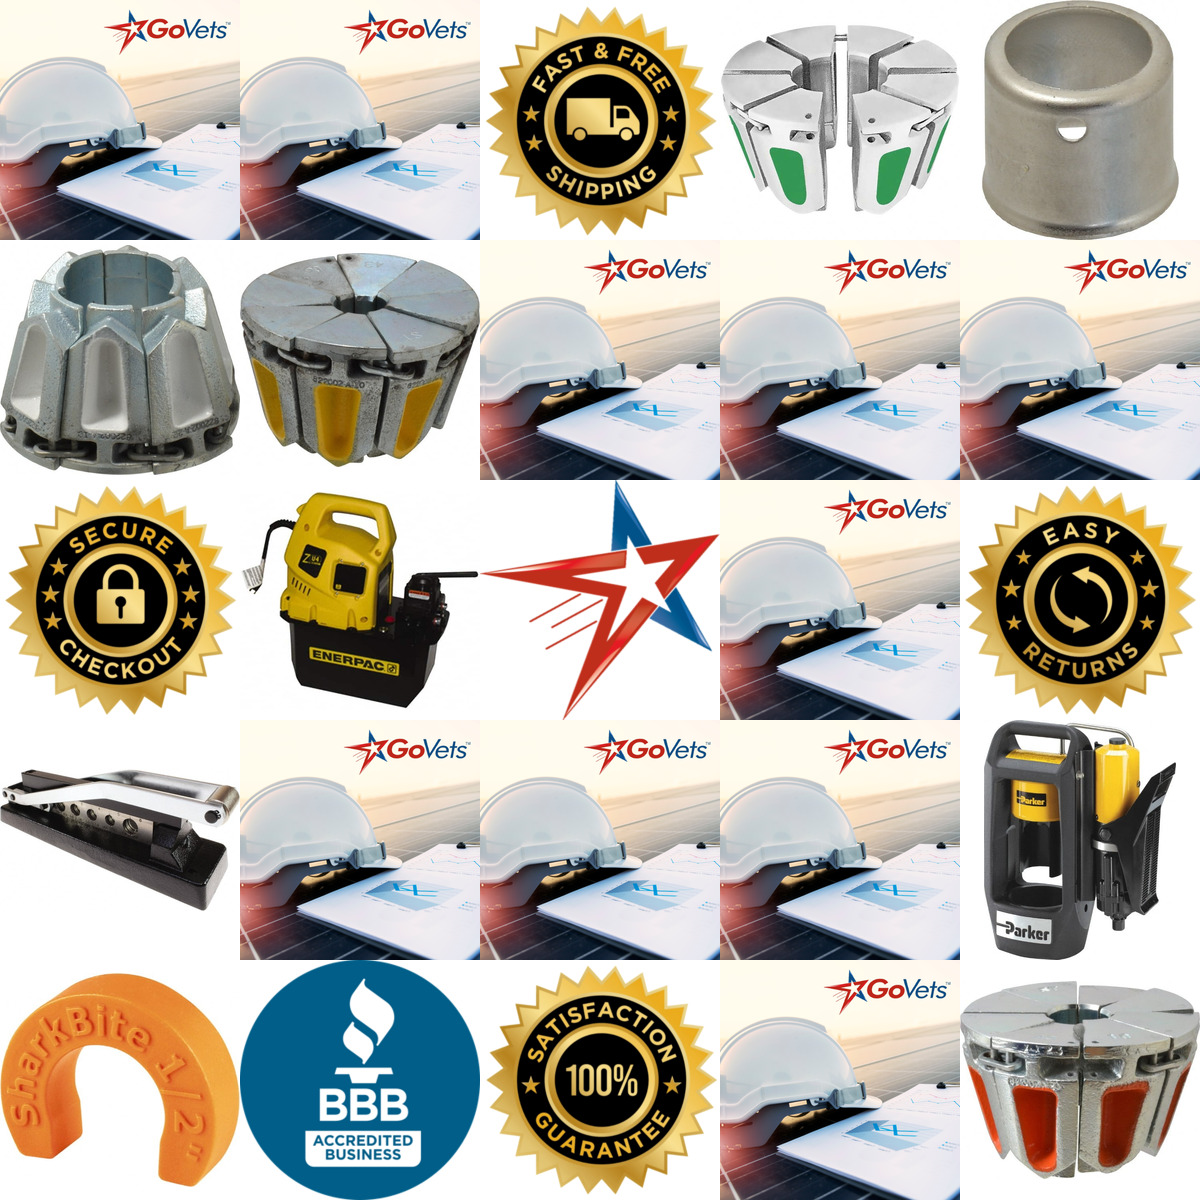 A selection of Hose Crimpers products on GoVets